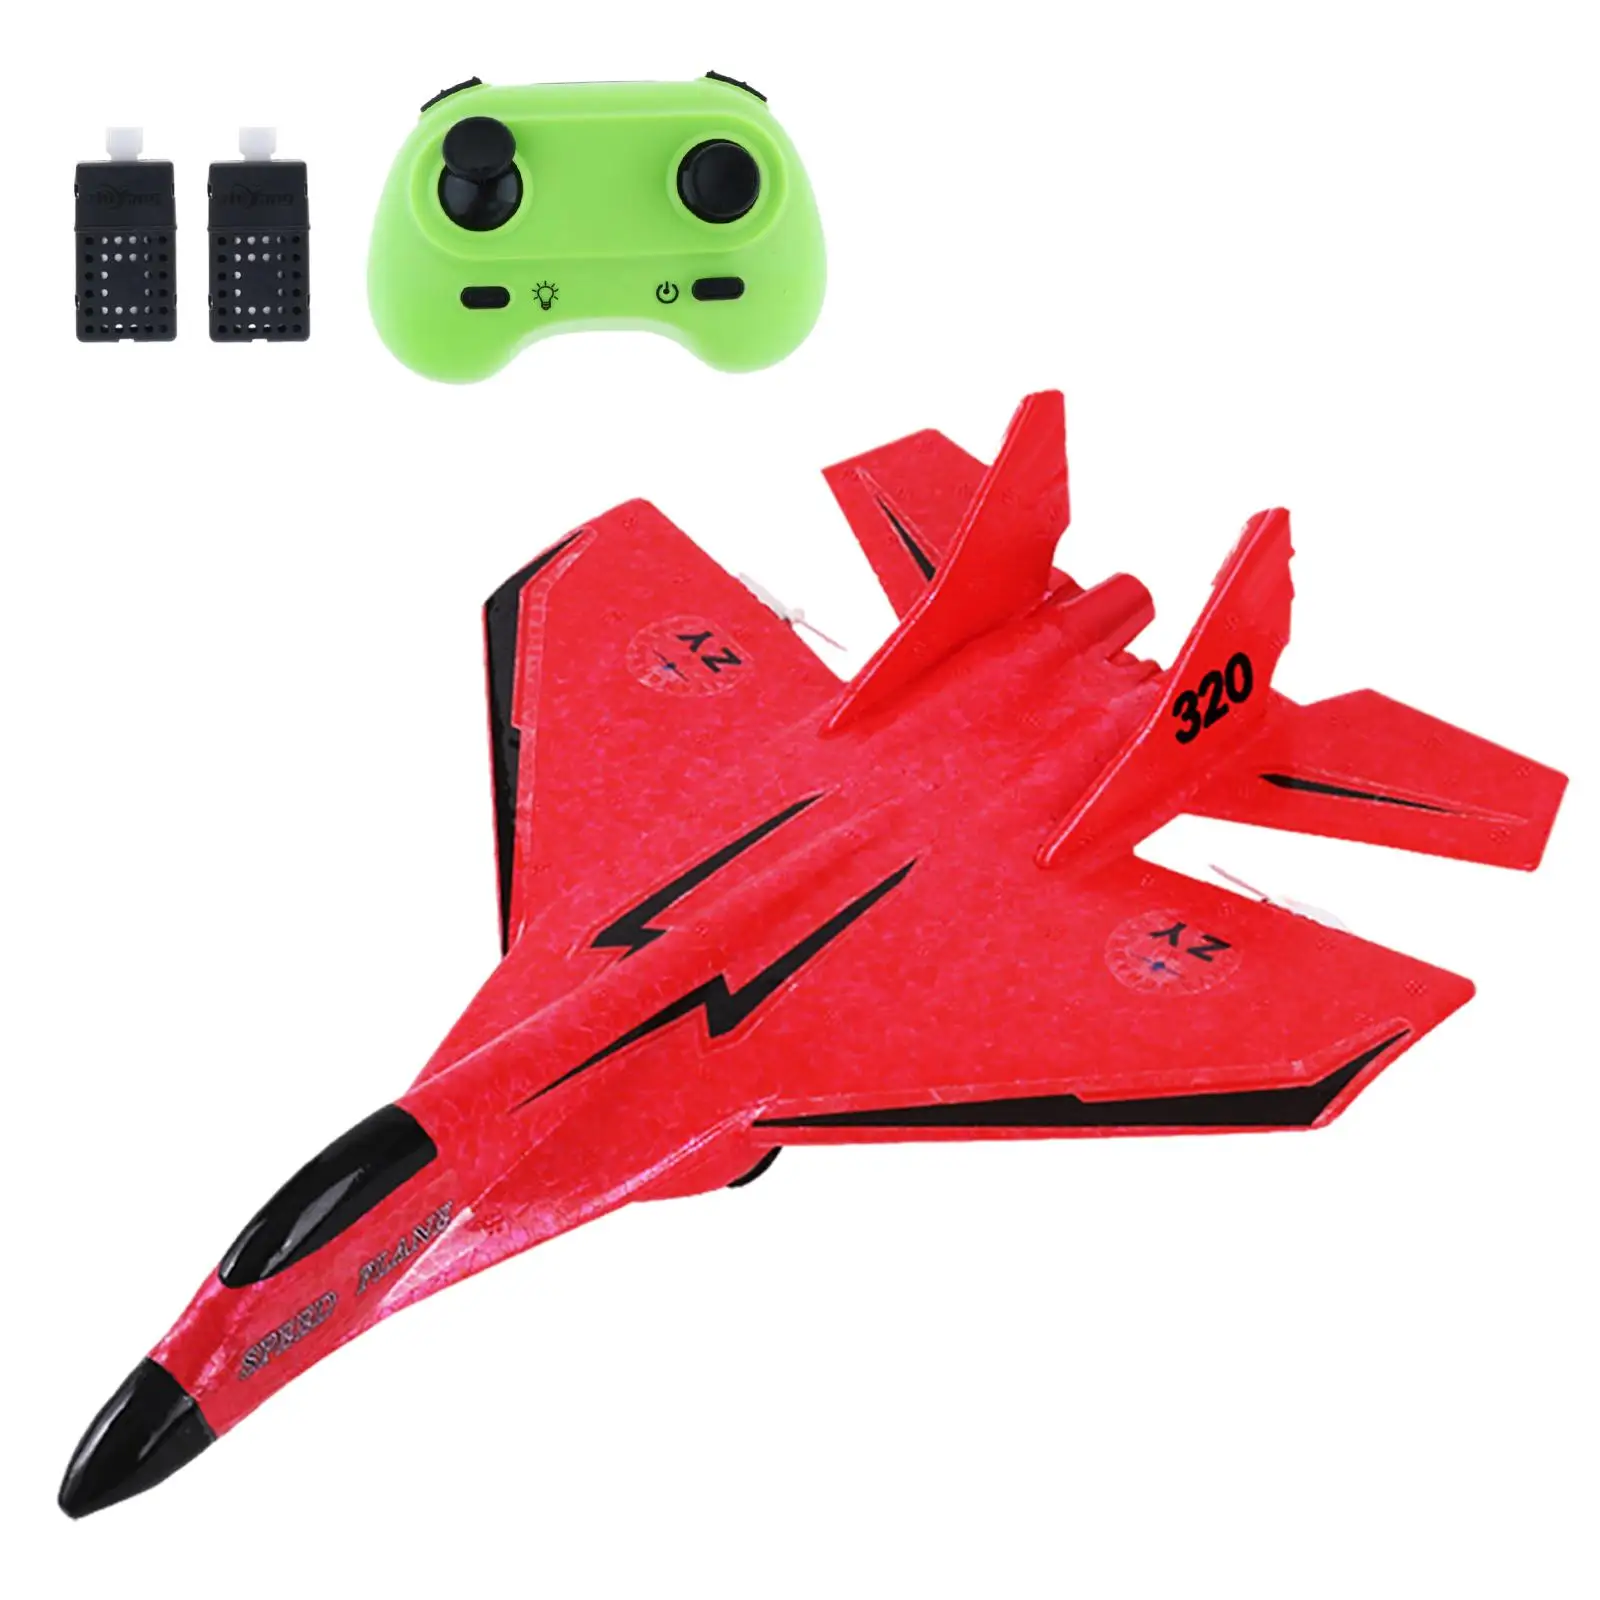 2 CH RC Planes Easy to Control Lightweight 2.4G 2 Channel RC Glider for Kids